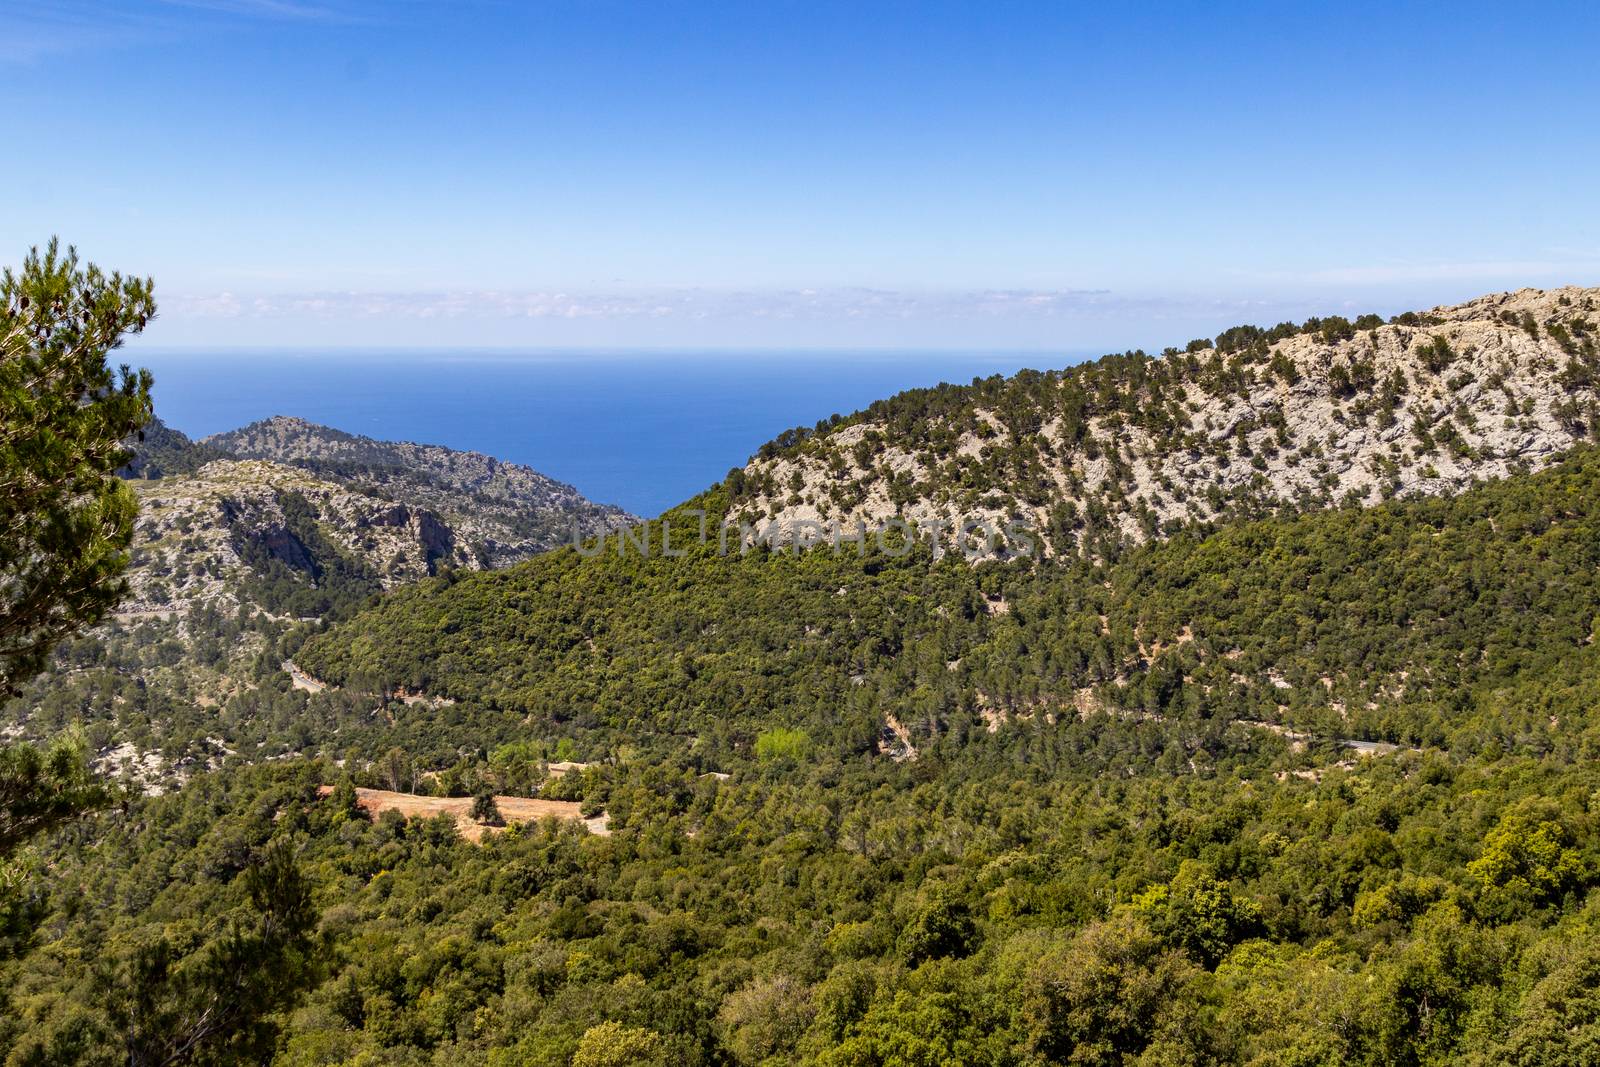 Scenic View at landscape between Gorg Blau and Soller on balearic island Mallorca, Spain 